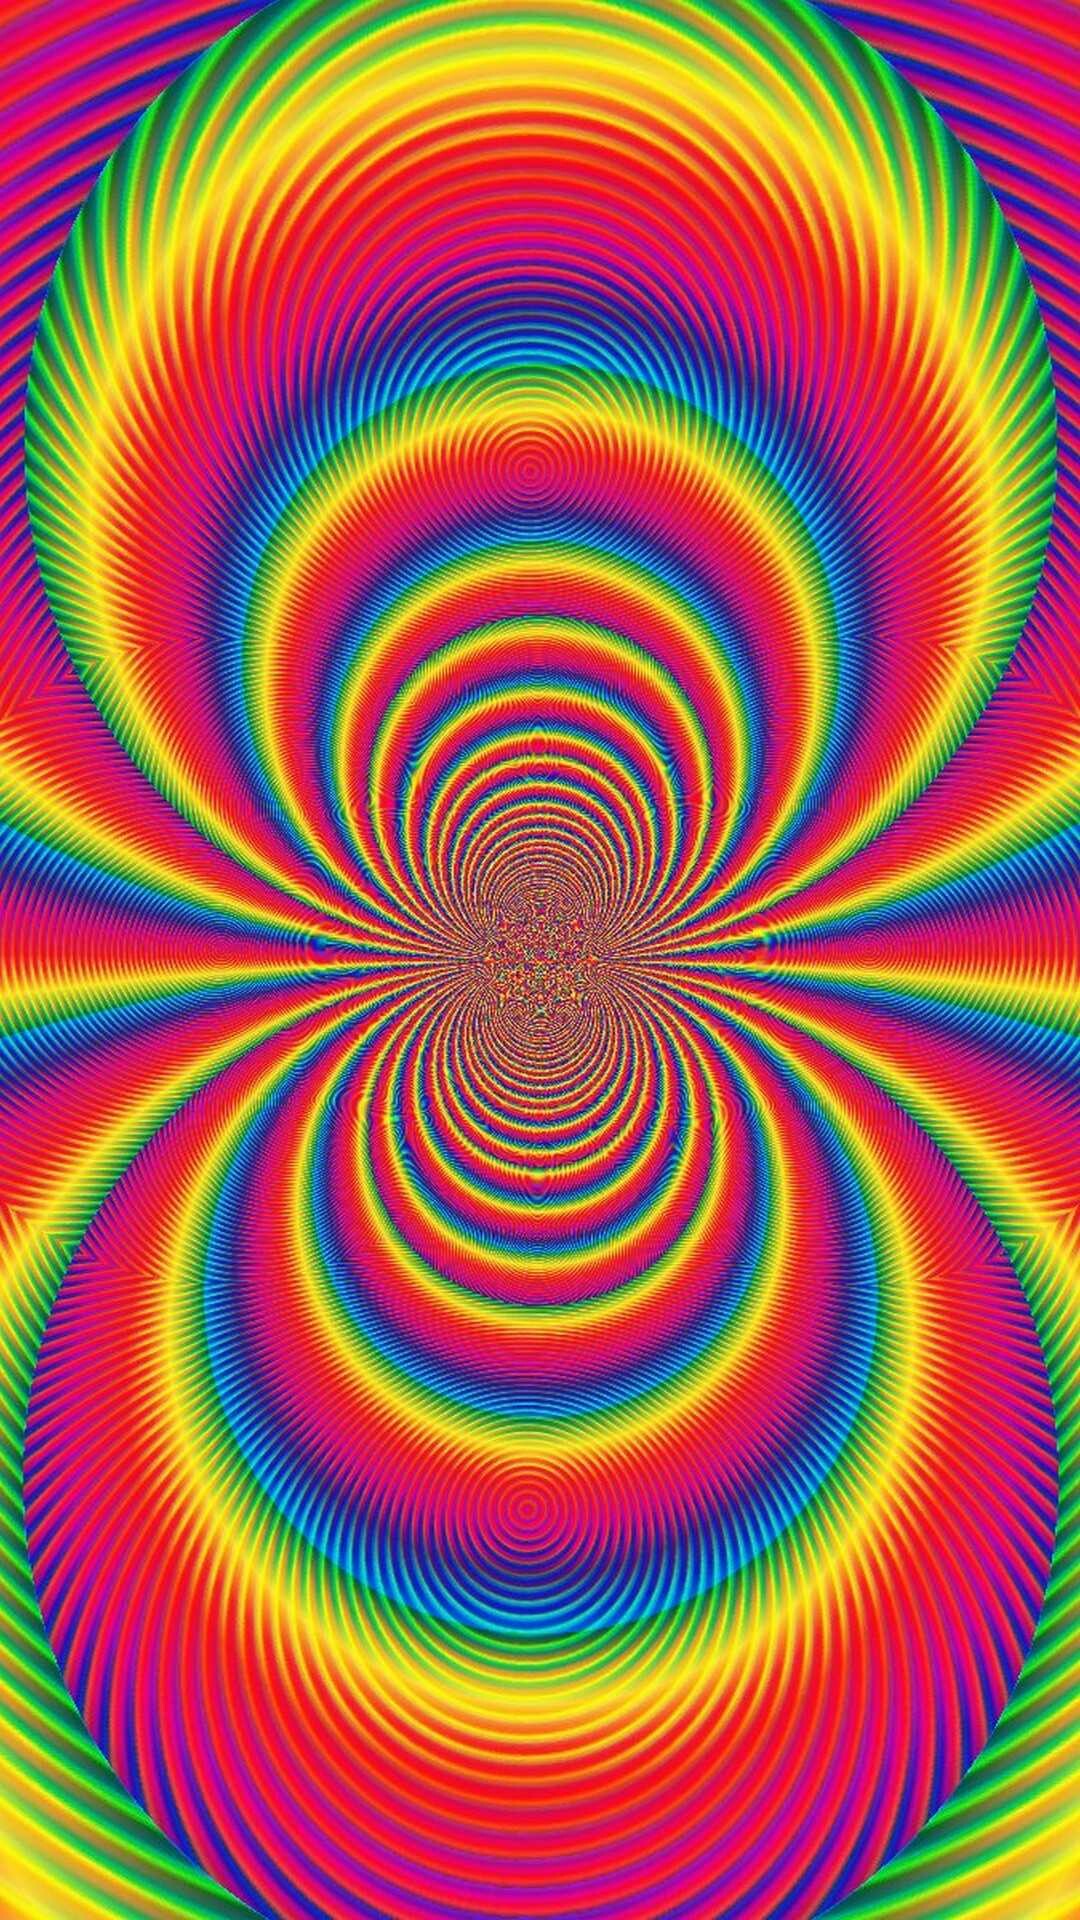 Rainbow Colors: Optic illusion, An abstract art form, Geometric. 1080x1920 Full HD Background.